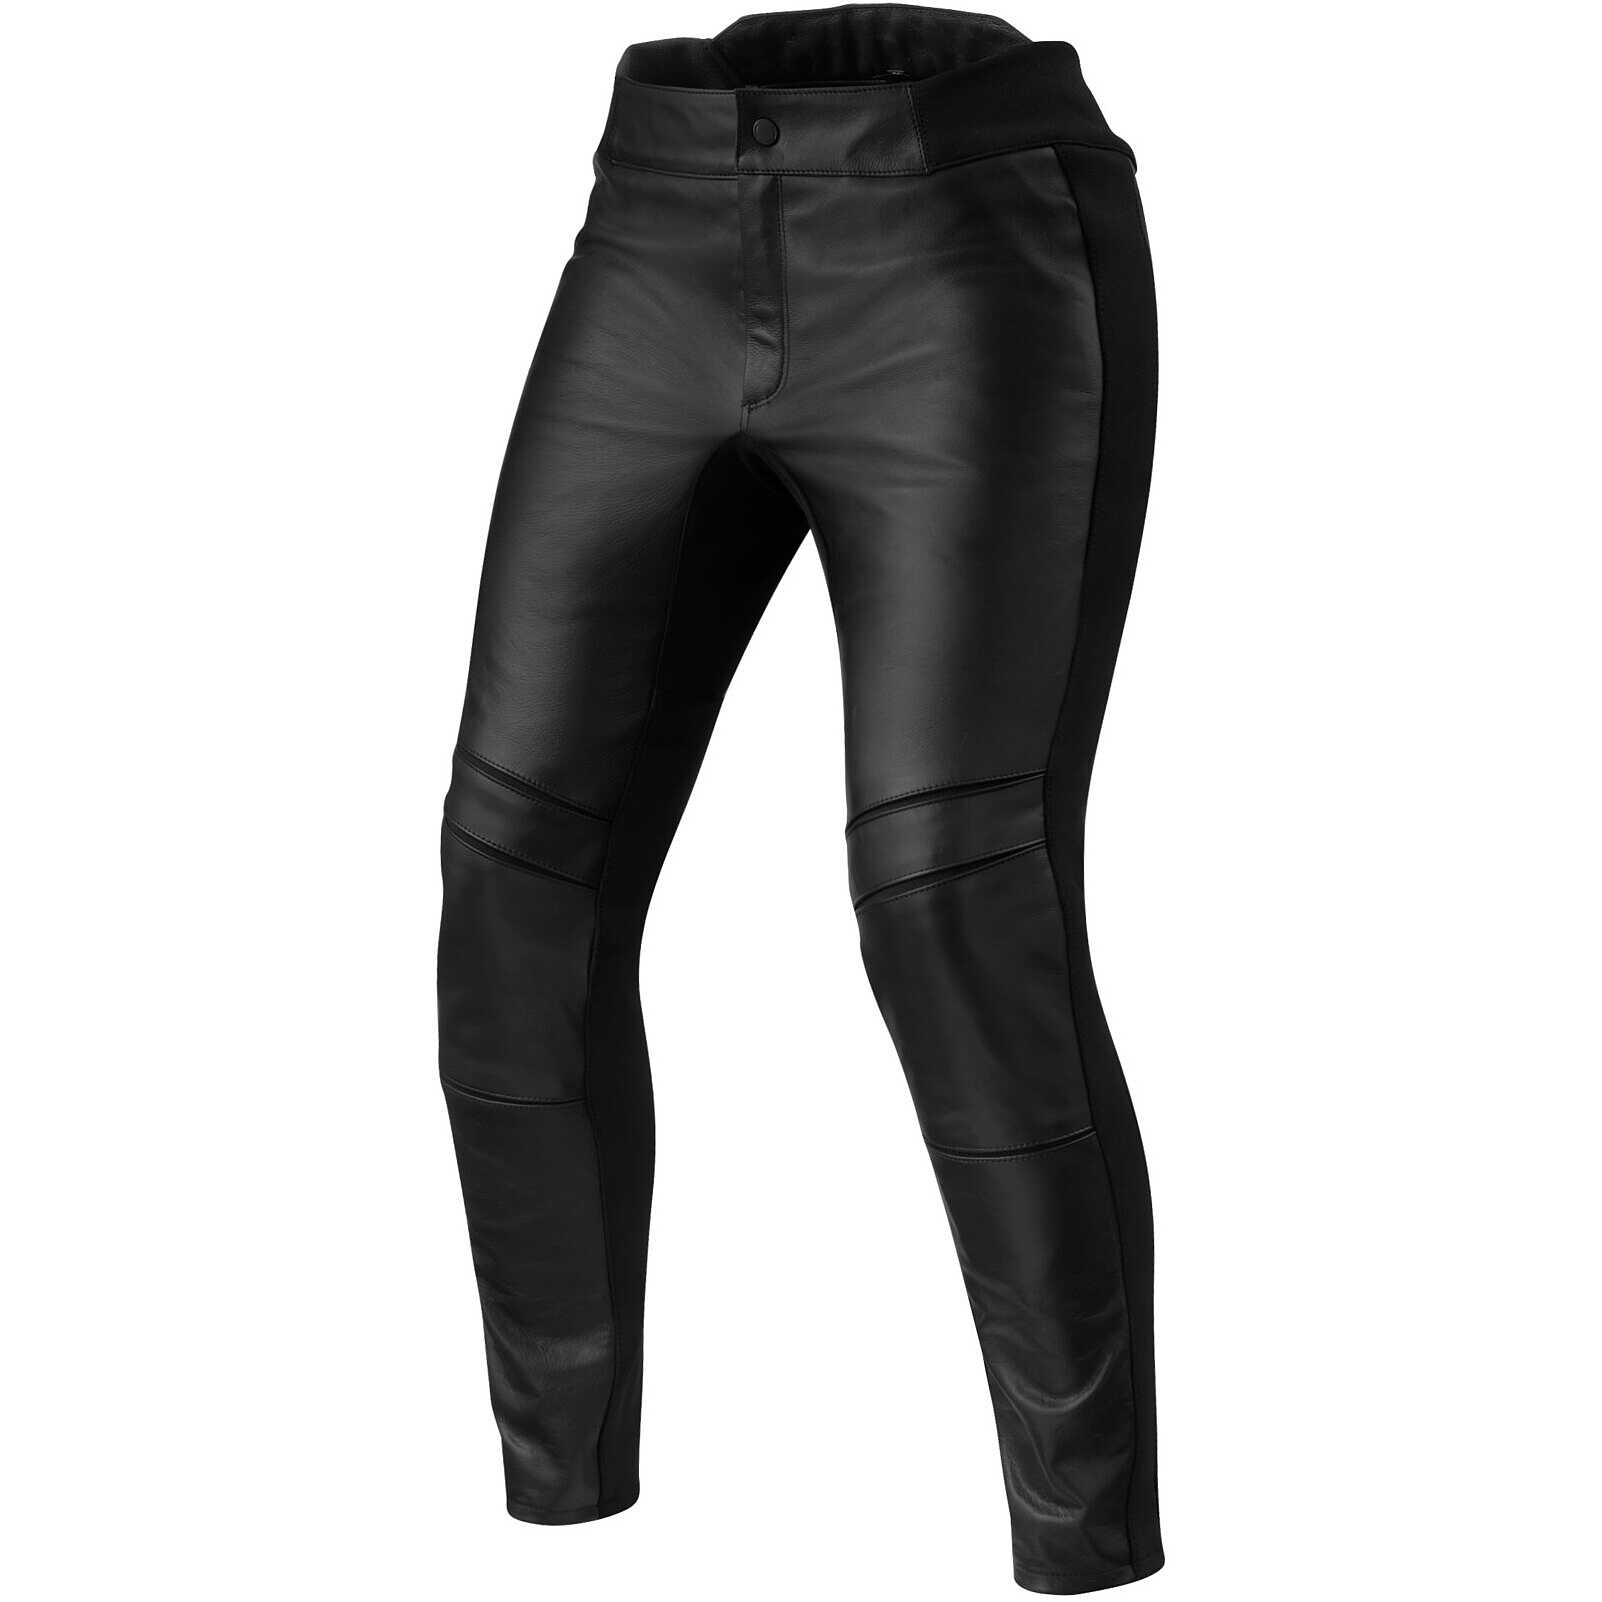 Women's Leather Motorcycle Pants Cafe Racer Lessy Aviator